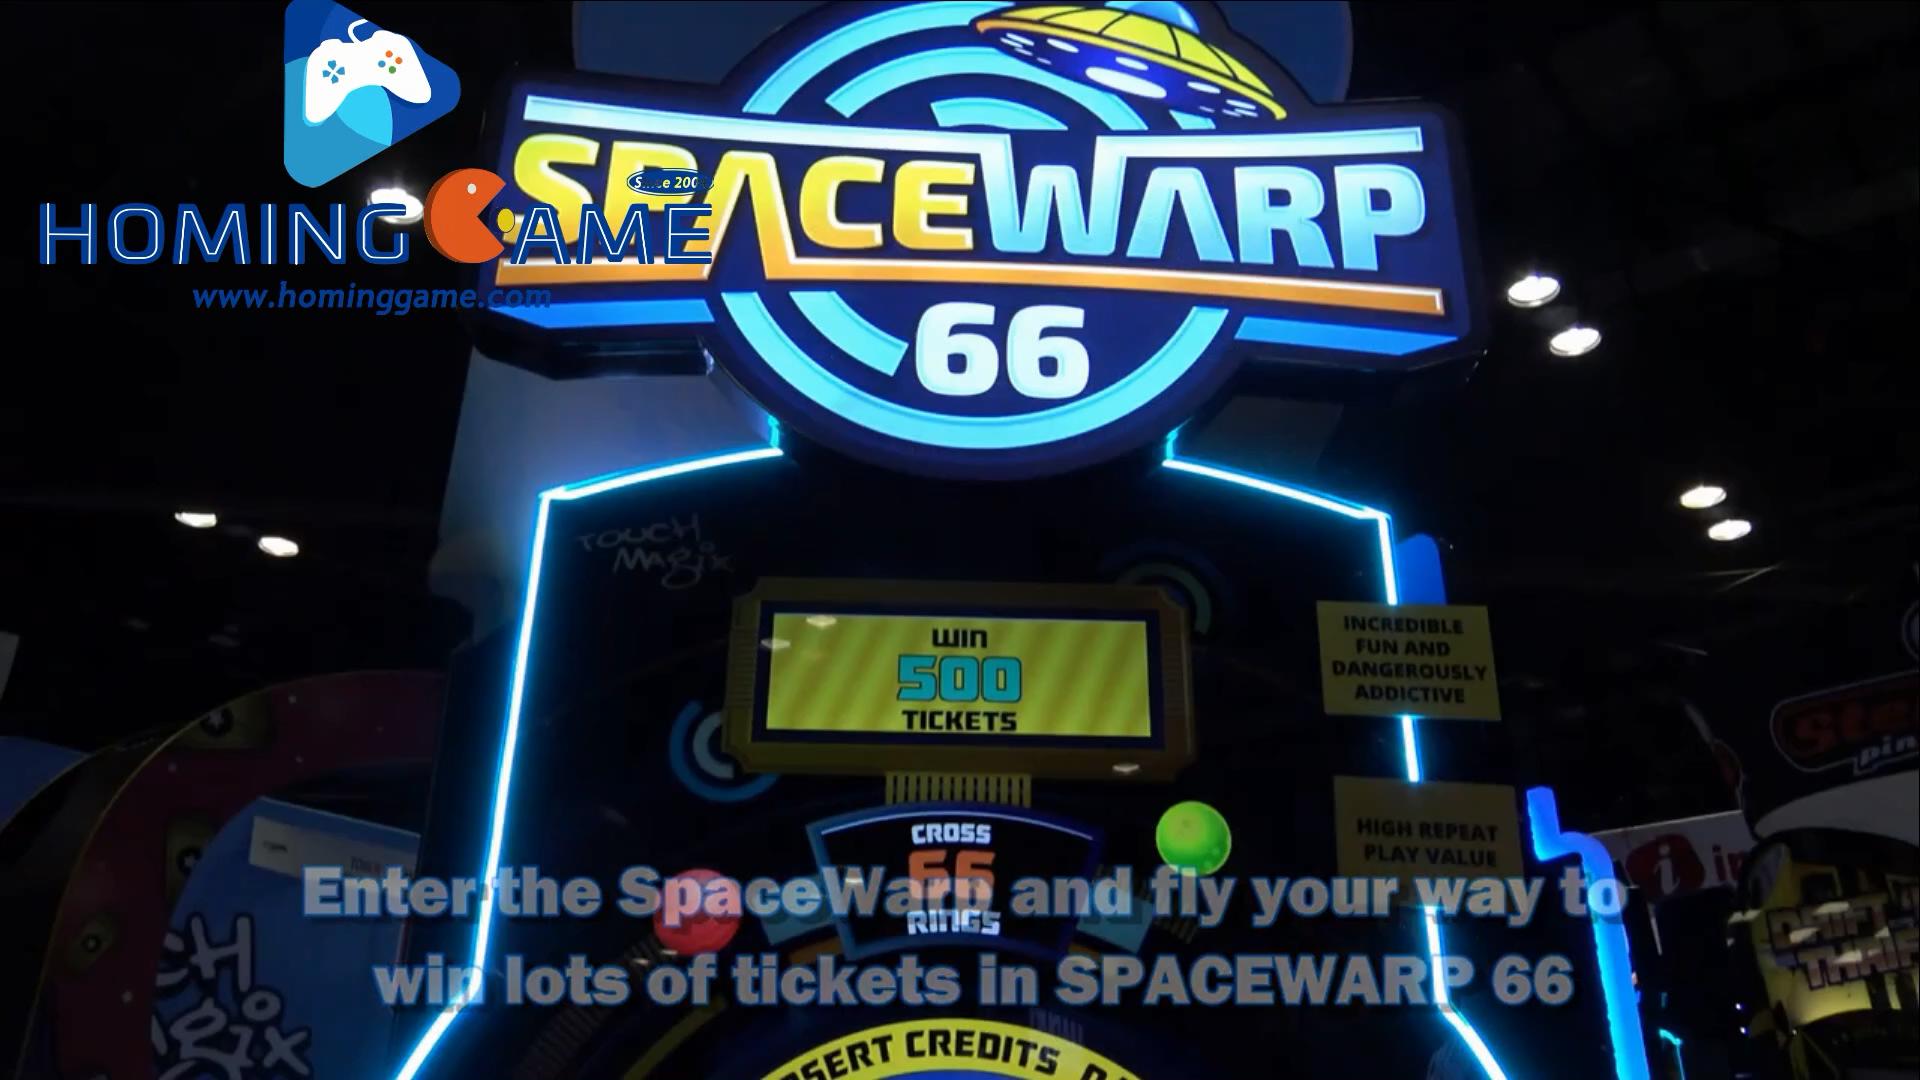  <br />
space warp,space warp lottery game machine,space warp game machine,space warp 66 turning lottery arcade game machine,game machine,game machine supplier,game machine factory,game machine for sale,arcade game,arcade games,coin operated game machine,lottery game,kids game machine,amusement park game equipment,game equipment,indoor game machine,electrical game machine,family entertainment game machine,entertainment game,kids game equipment,children game machine,fec game machine,FEC GAME,sports game machine,sport game,hominggame,www.gametube.hk,electrical game,coin games,video game machine,simulator game machin,games,arcade,hominggame game machine